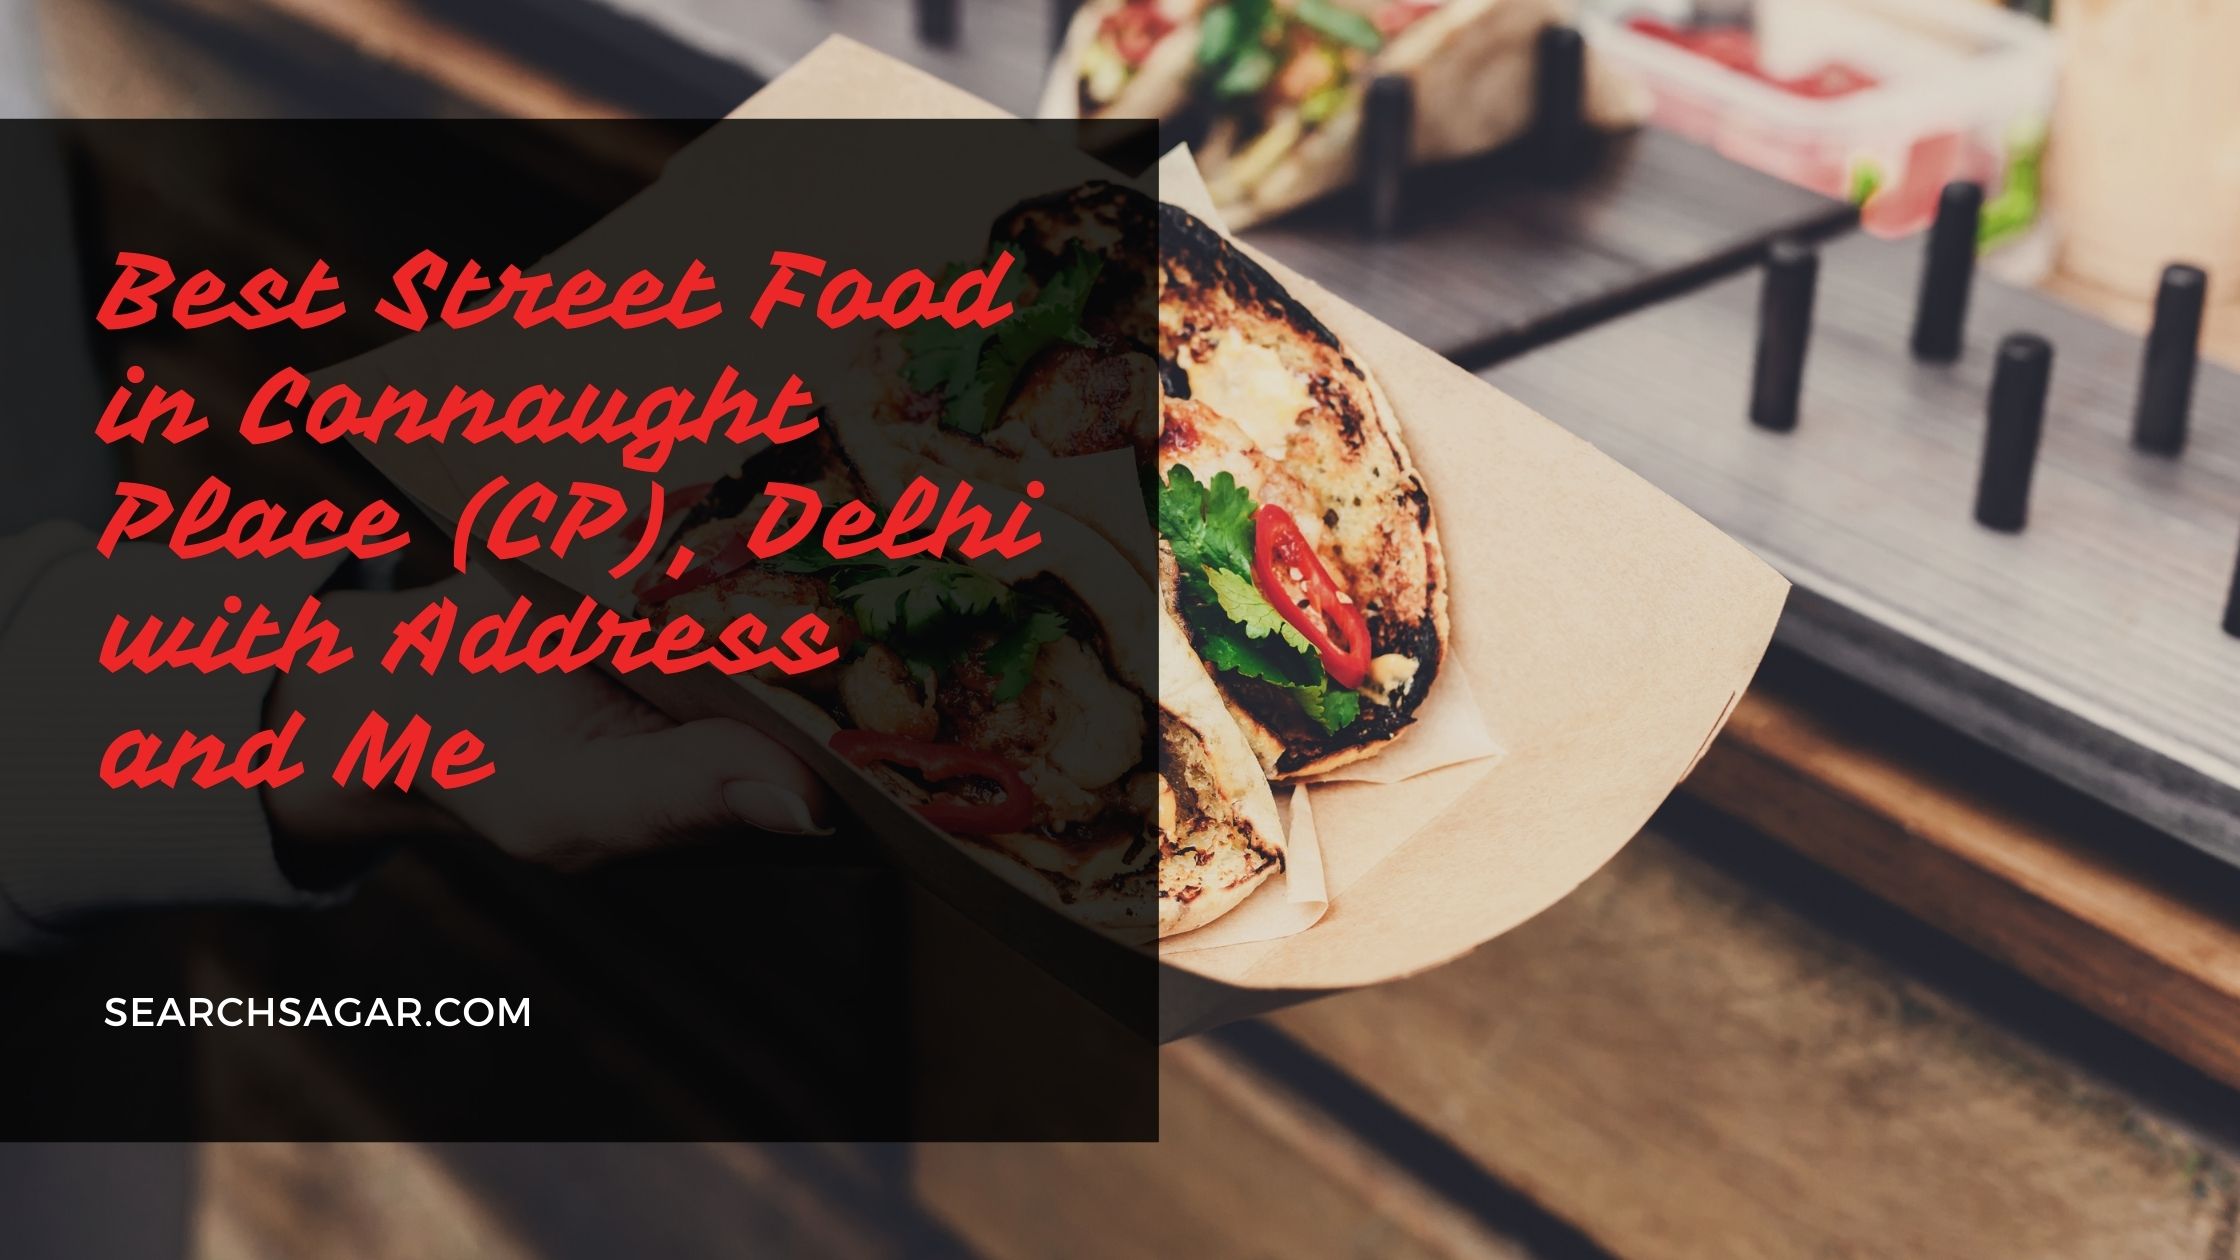 Best Street Food in Connaught Place (CP), Delhi with Address and Menu